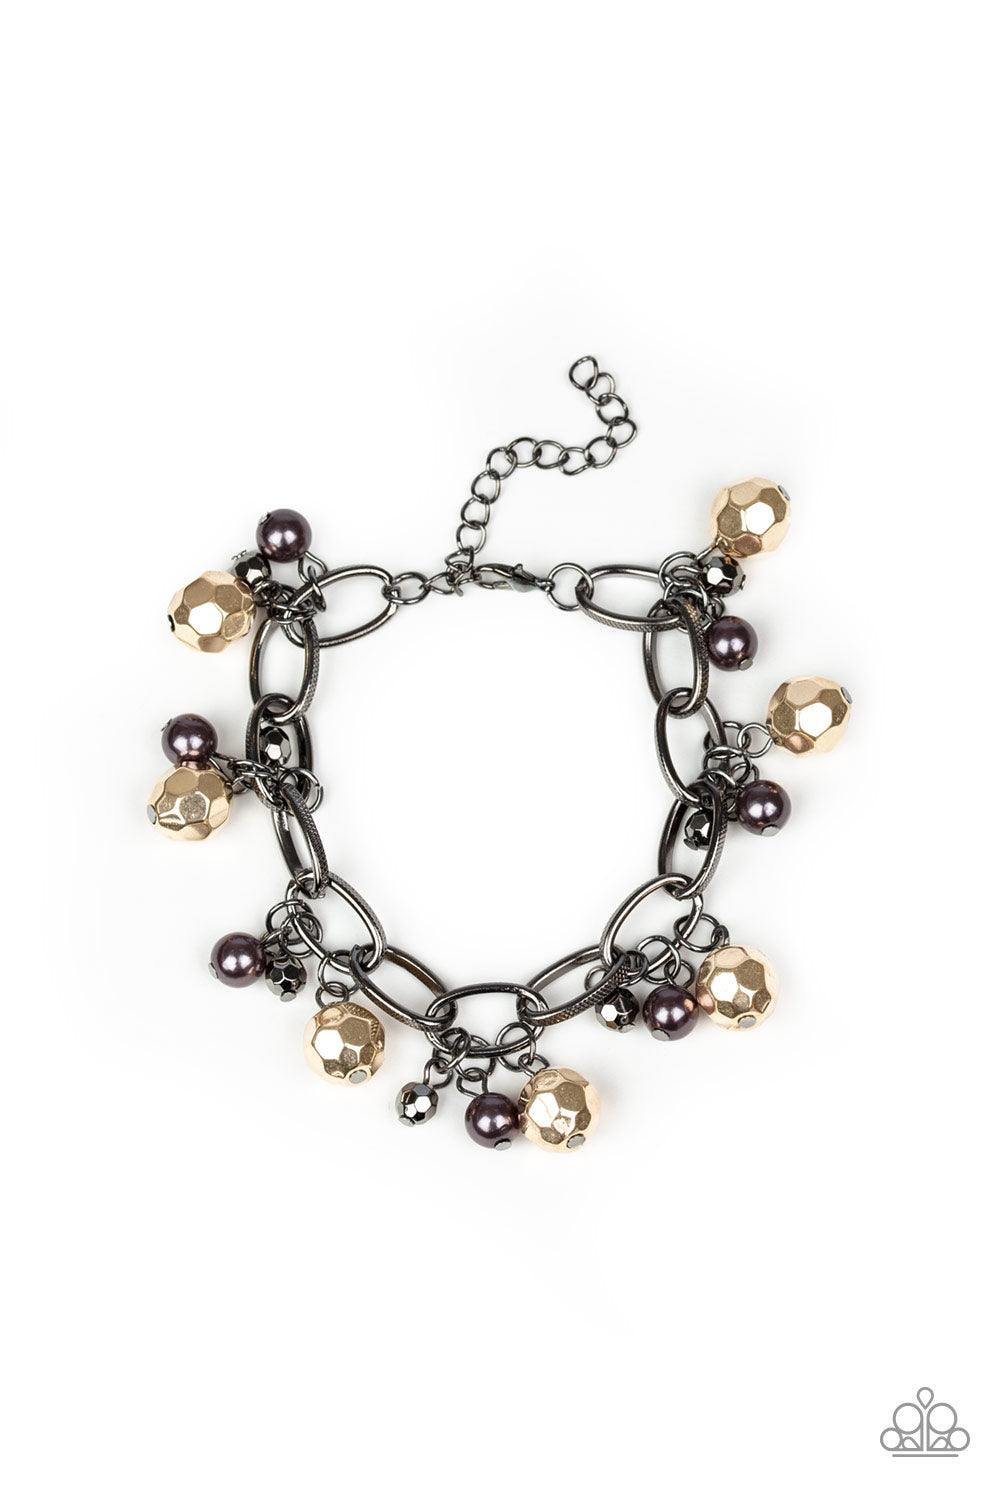 Paparazzi Accessories Make in Malibu - Multi Varying in size, a collection of faceted gold and pearly gunmetal beads swings from a bold gunmetal chain, creating a whimsical metallic fringe around the wrist. Features an adjustable clasp closure. Sold as on